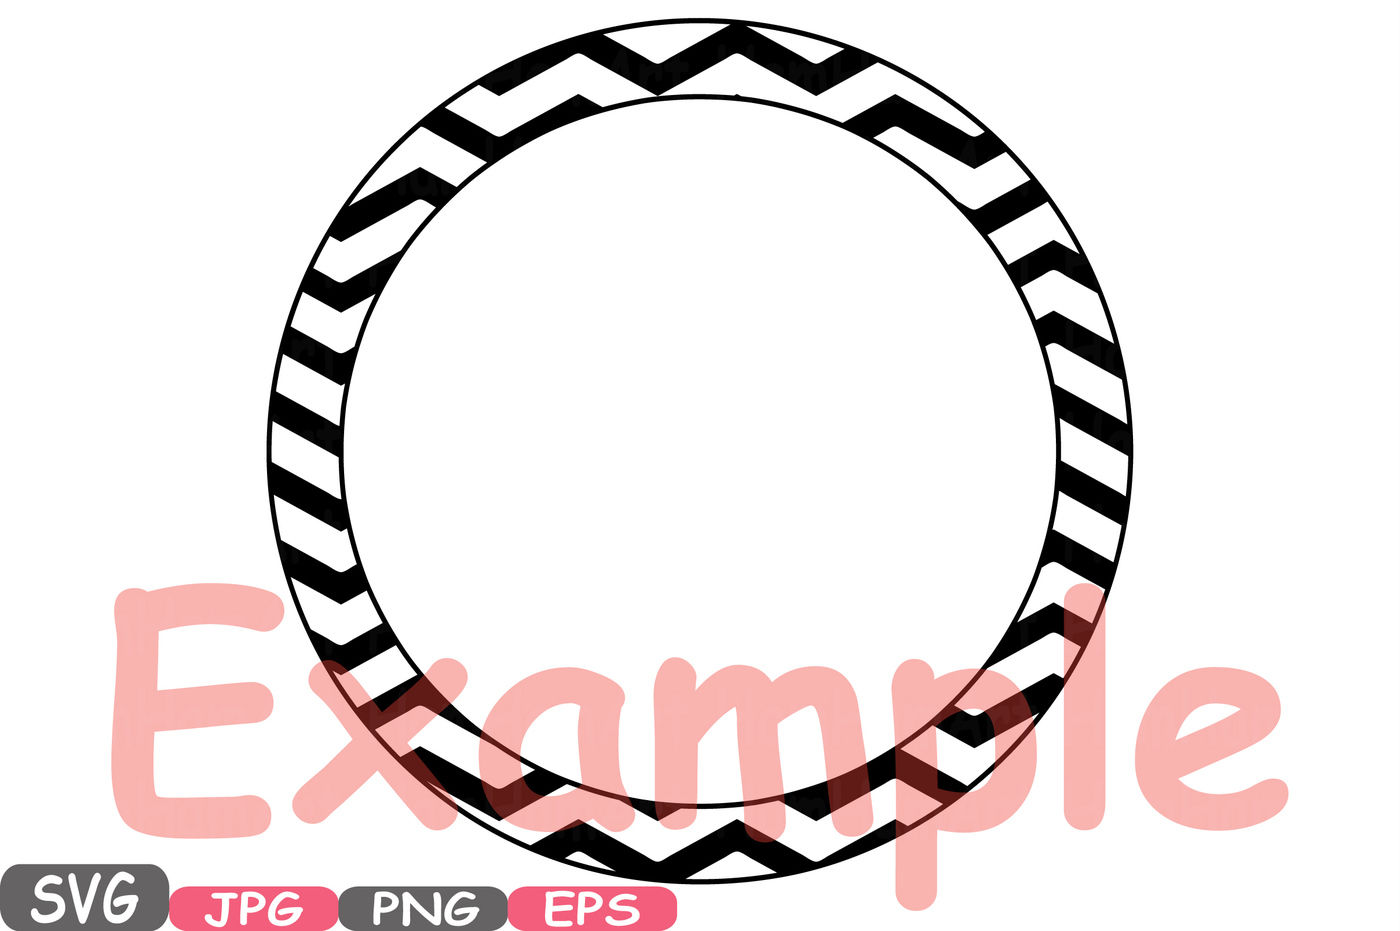 Download Stripes Circle Alphabet Svg Silhouette Letters Abc Cutting Files Sign Icons Cricut Design Cameo Vinyl Monogram Clipart 585s By Hamhamart Thehungryjpeg Com